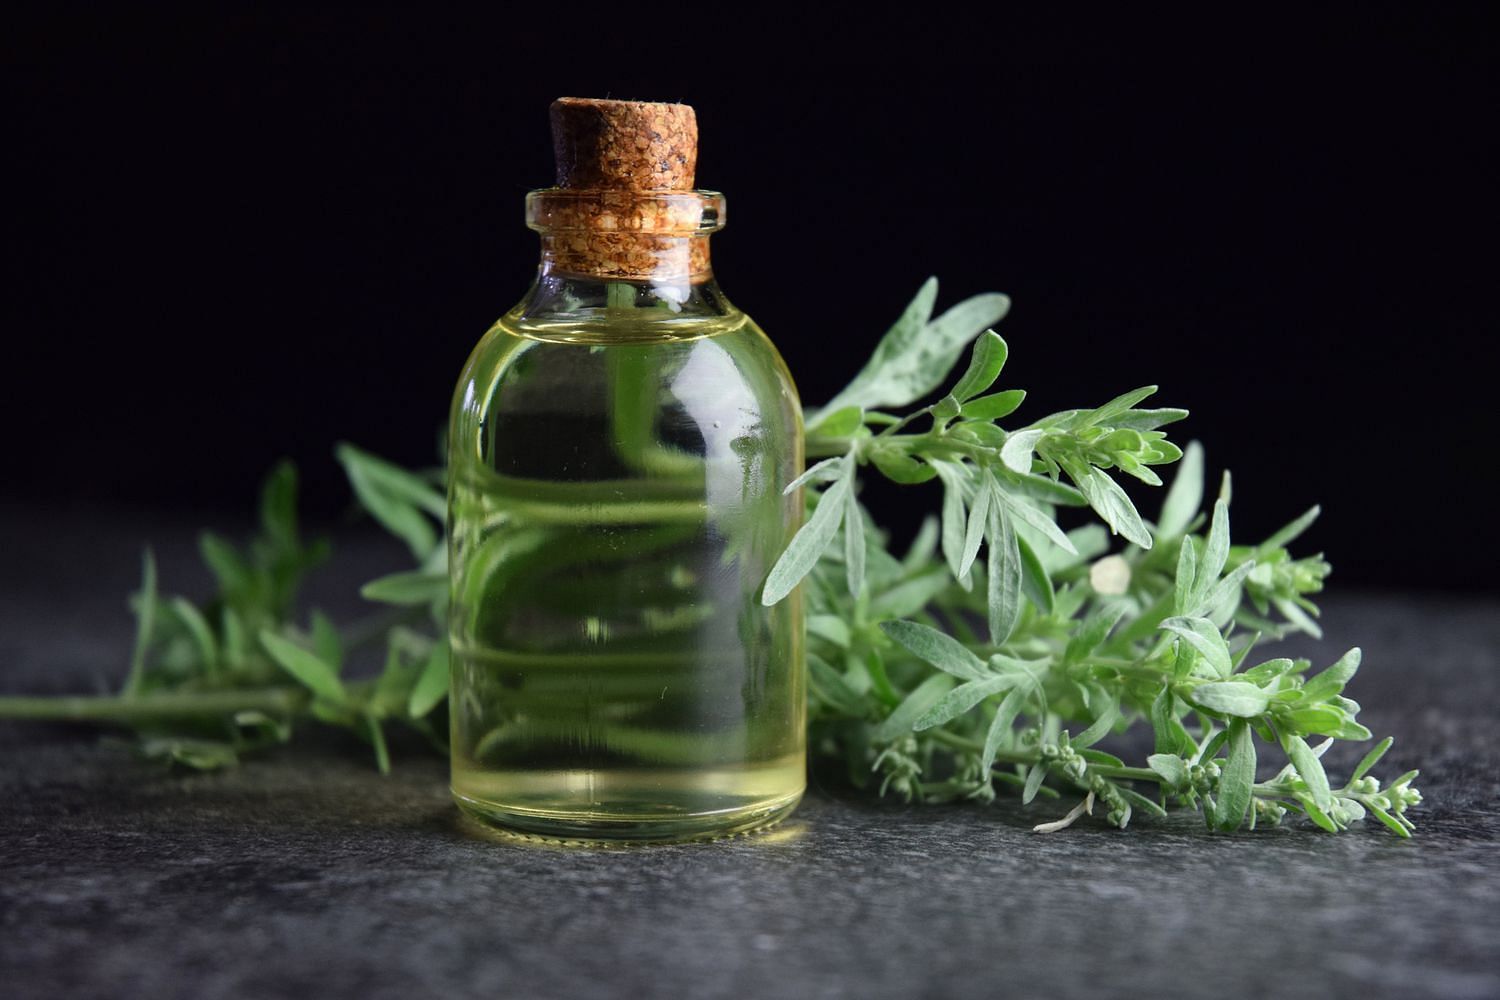 Due to its adaptable qualities, artemisia absinthium has many uses. (Getty Images)